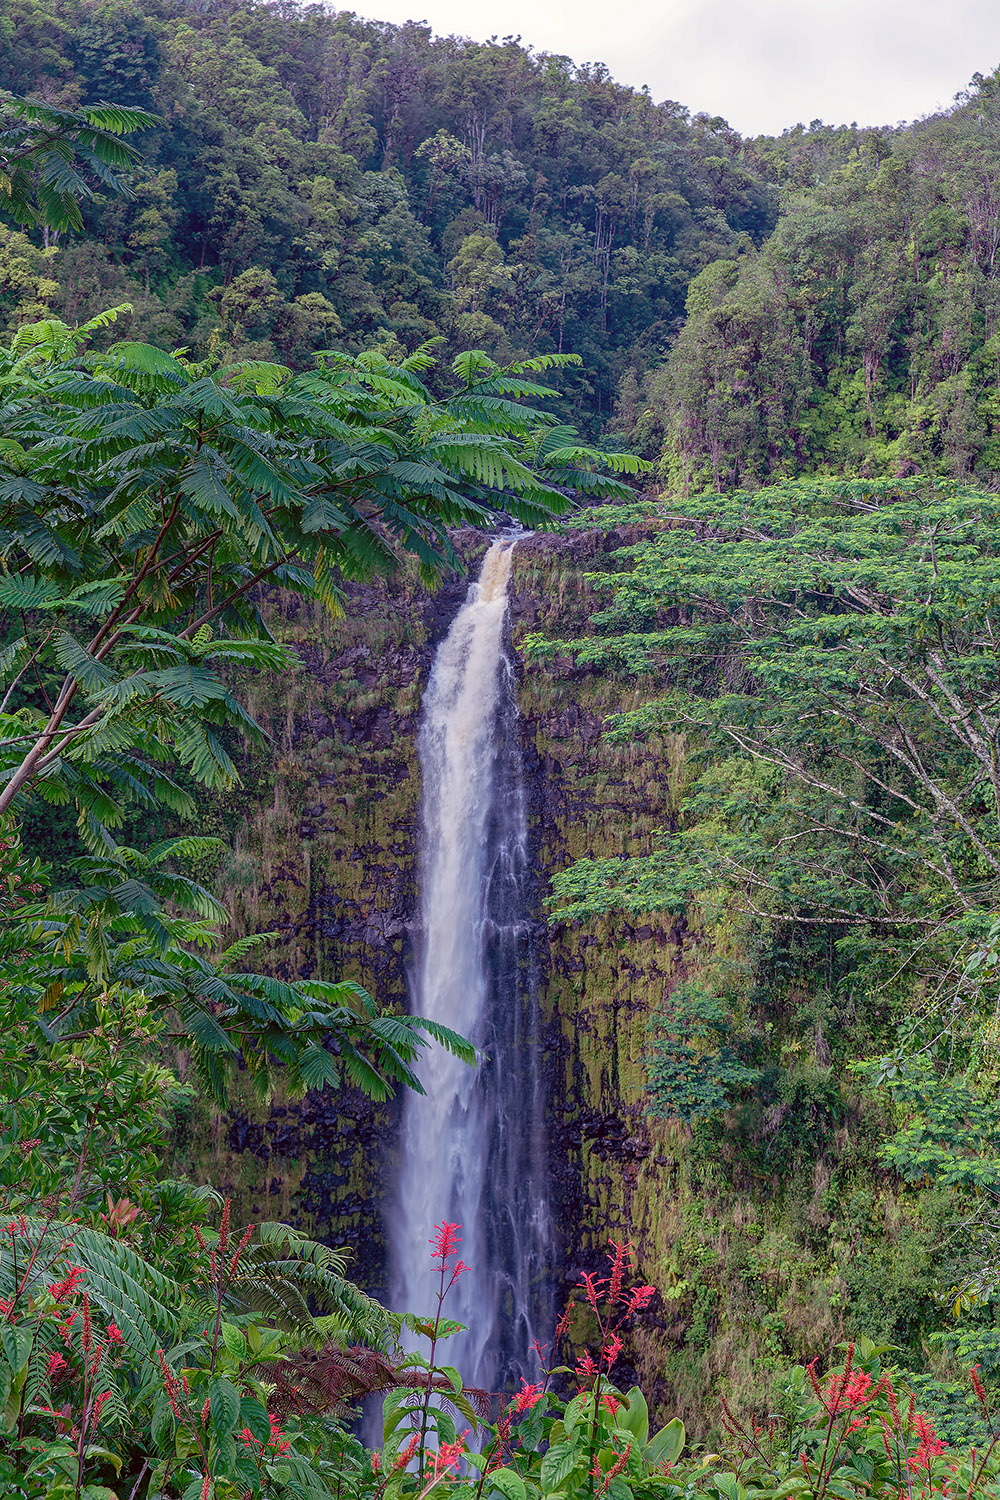 Our first good look of the Akaka Falls